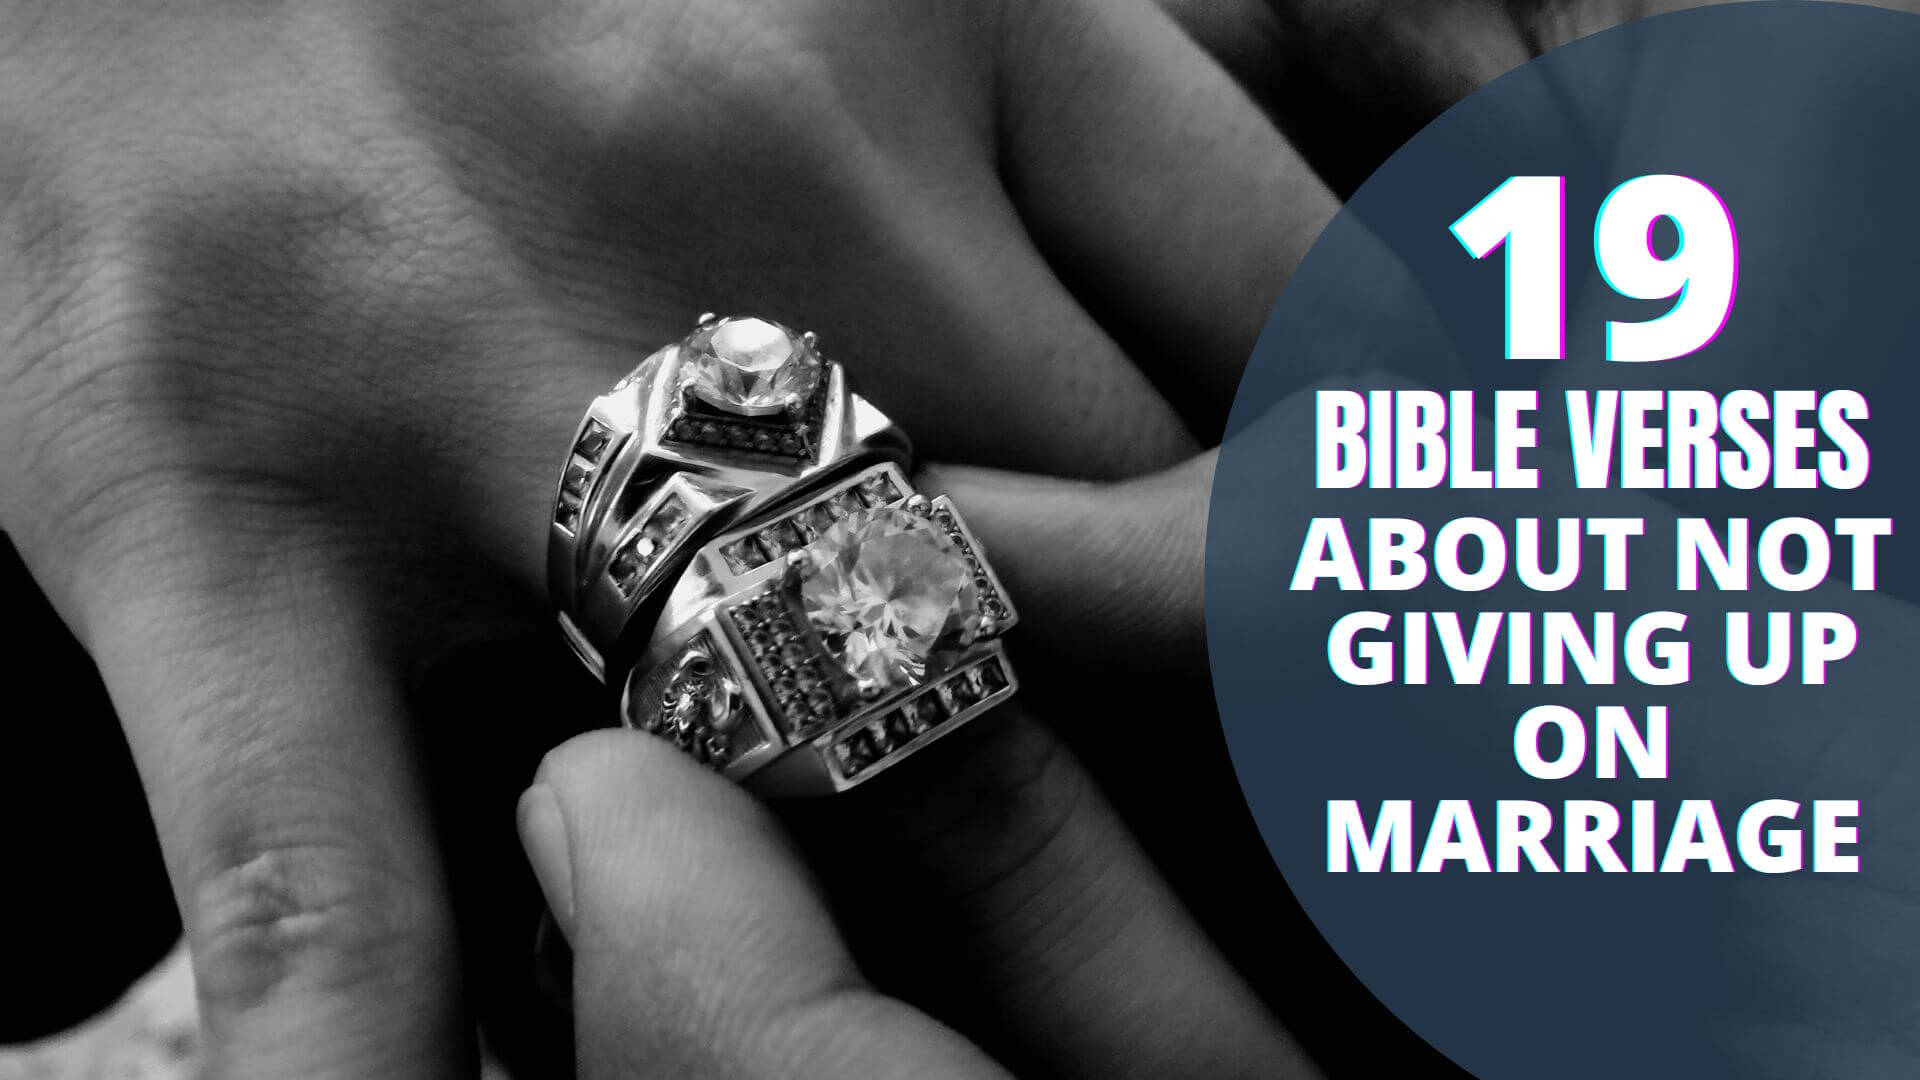 Bible verses about not giving up on marriage